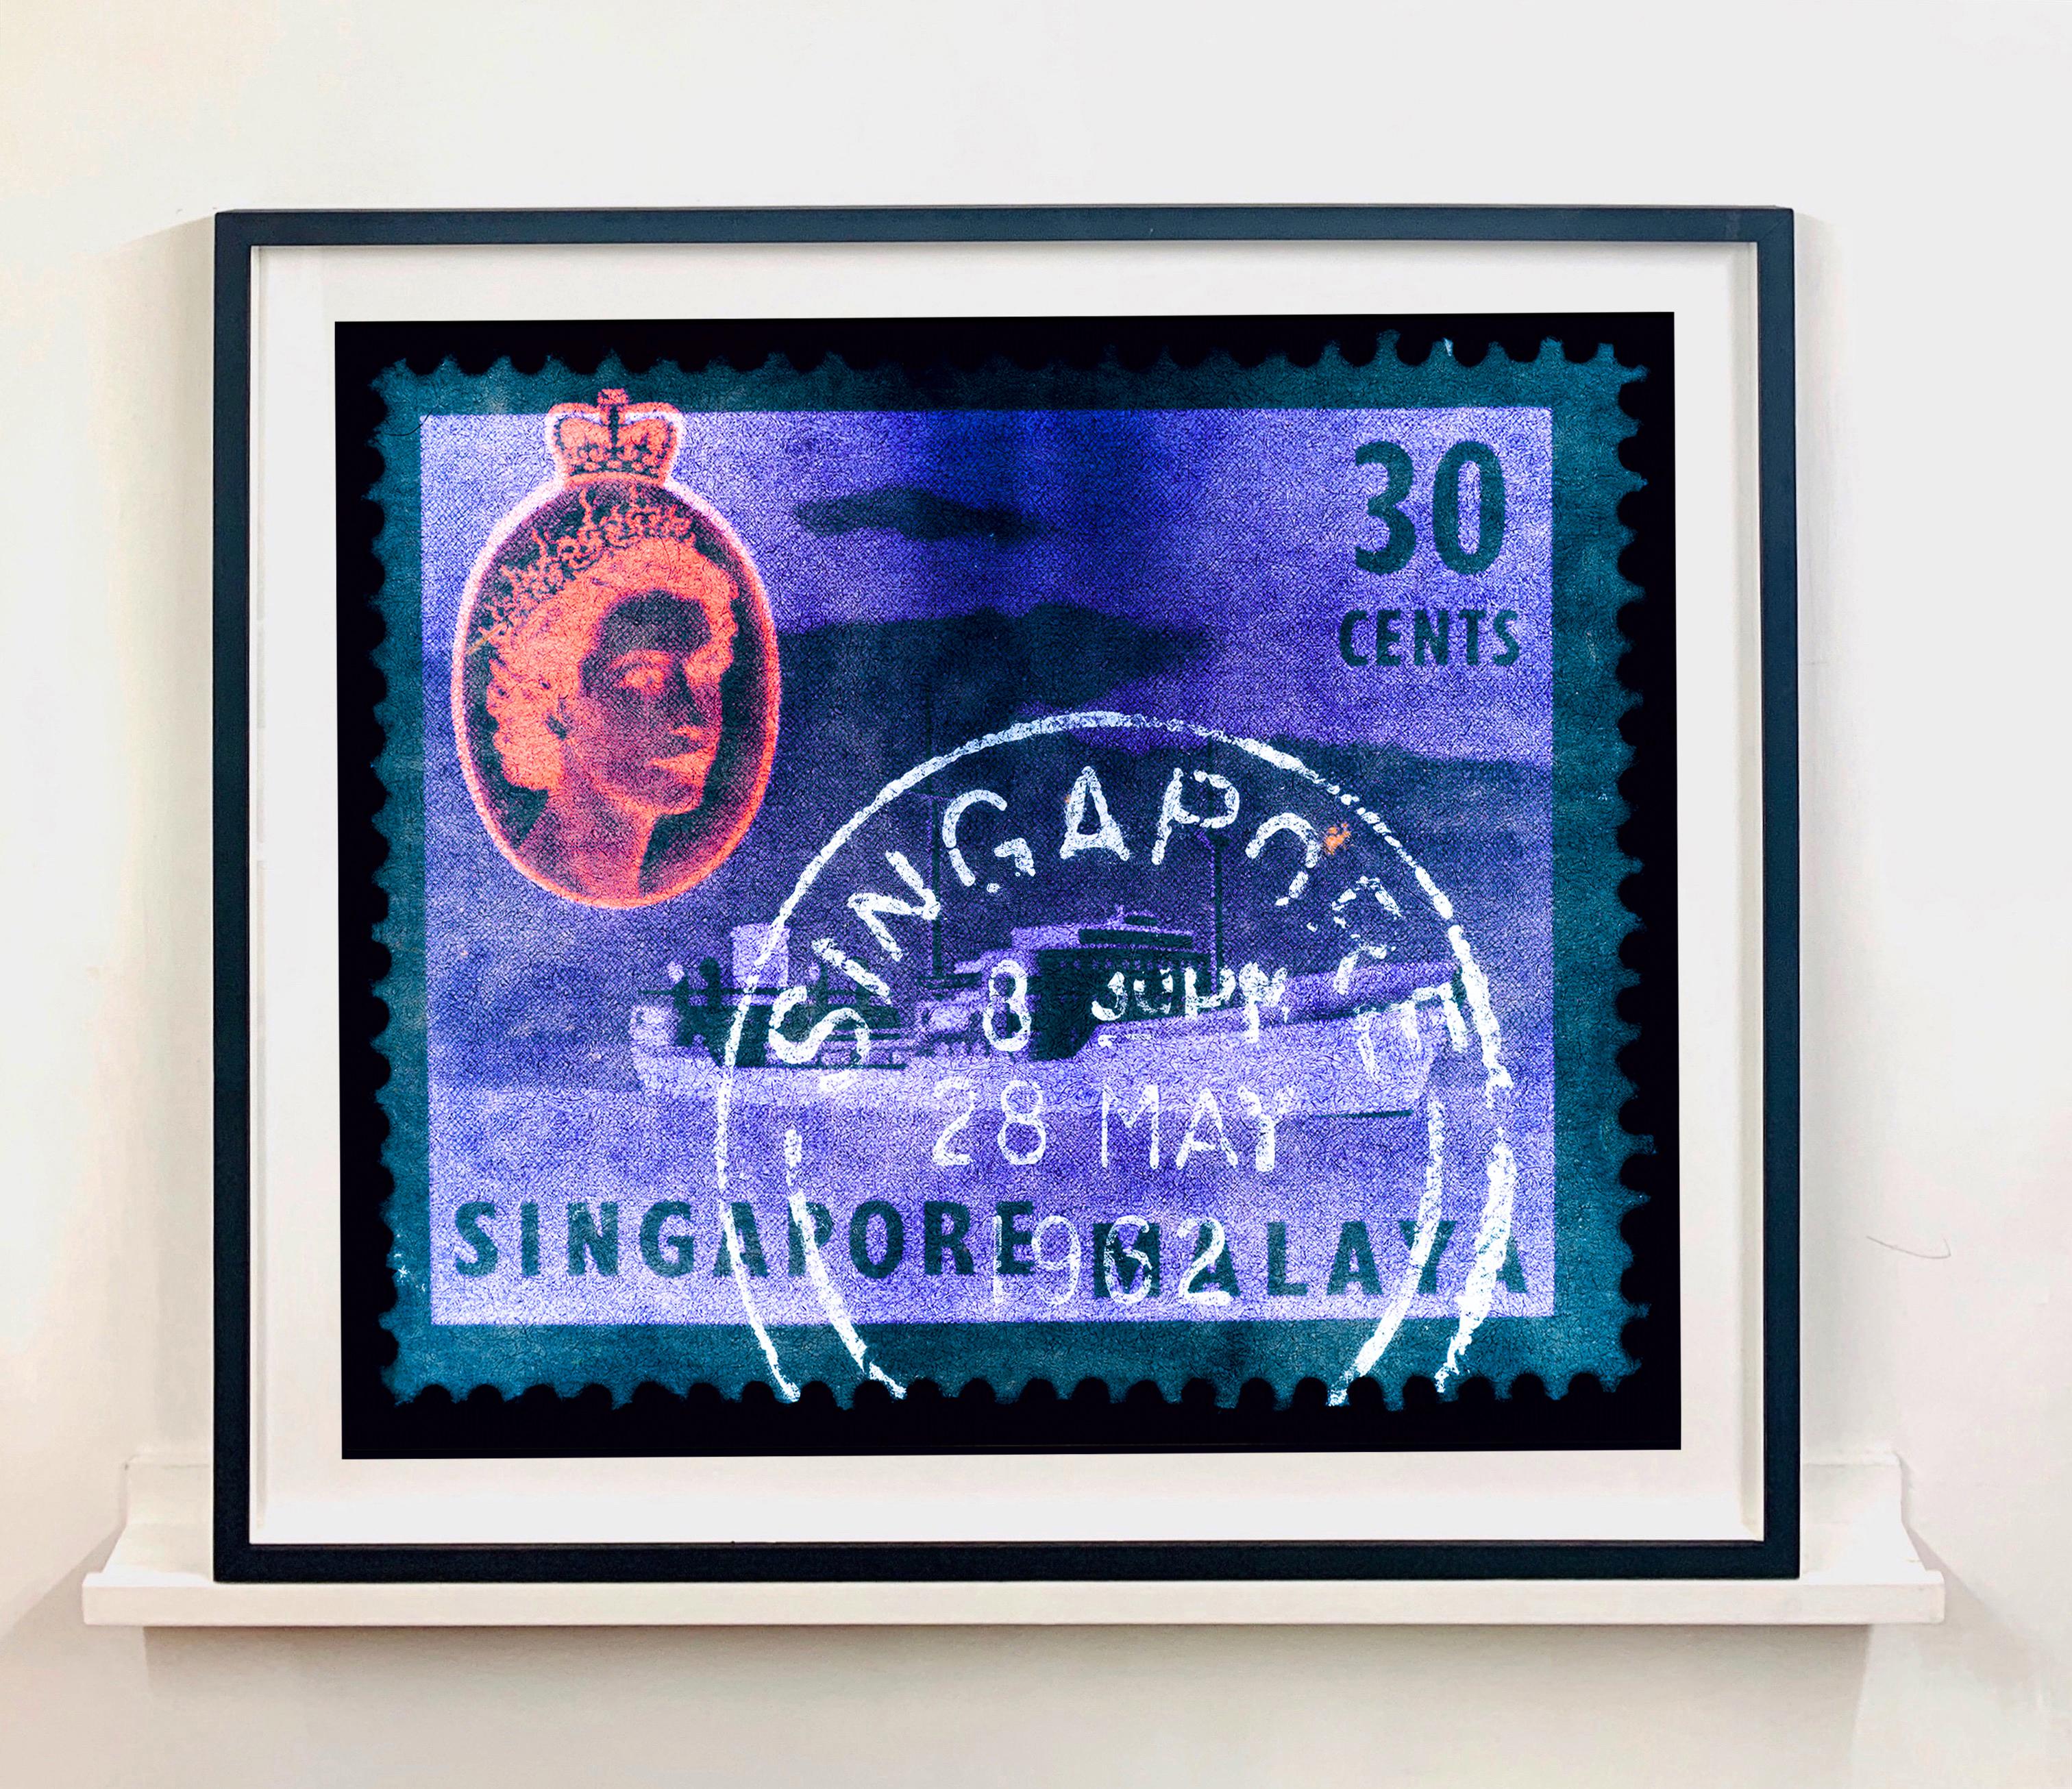 Singapore Stamp Collection, 30 Cents QEII Oil Tanker Teal - Pop Art Color Photo - Purple Print by Heidler & Heeps